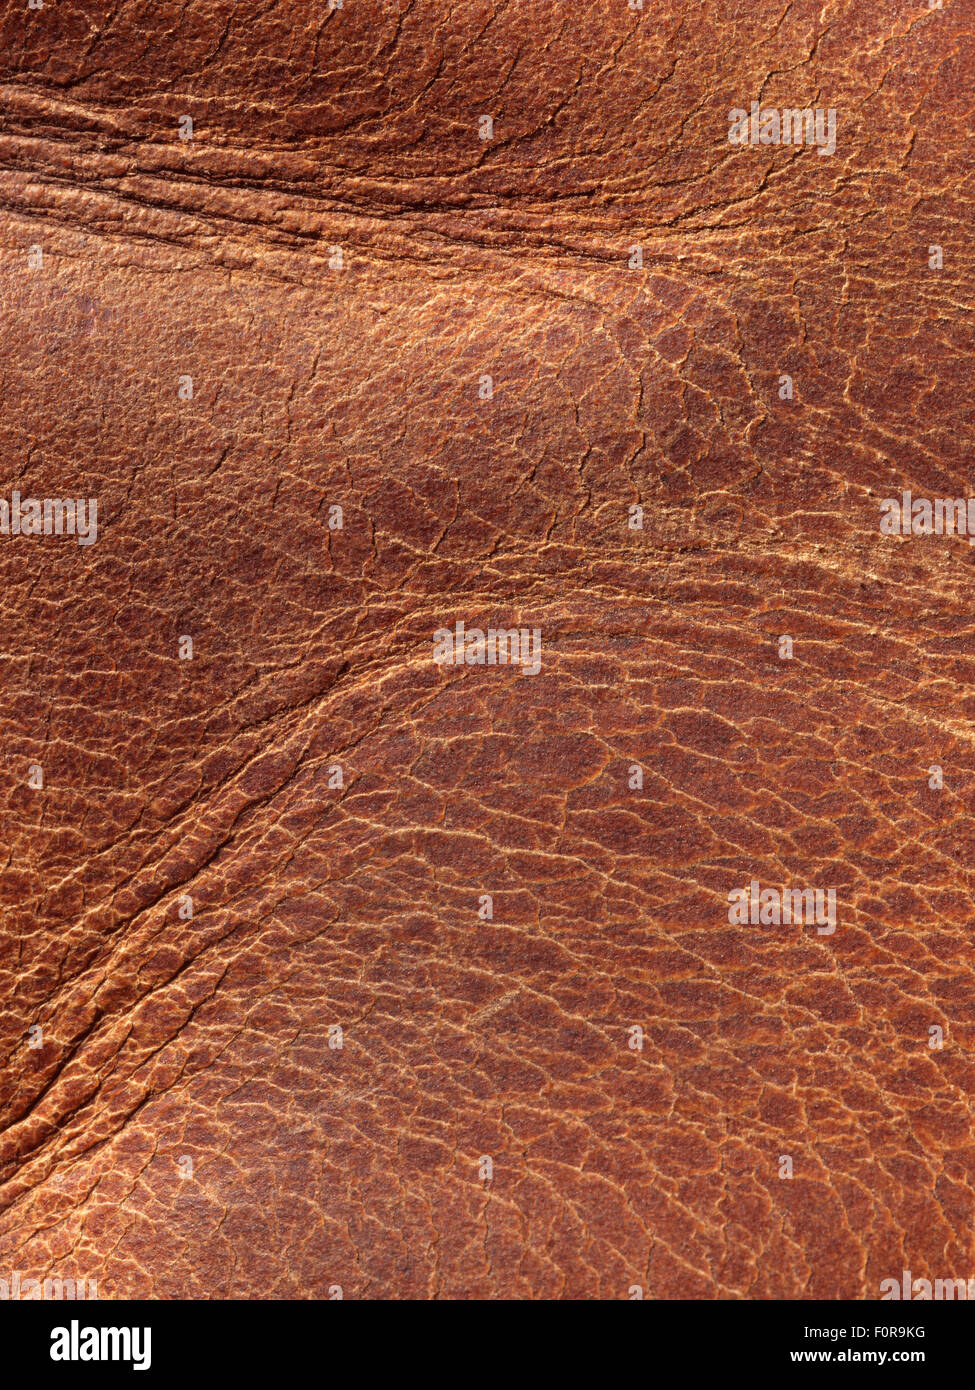 Close up of old leather panel ideal for use as a background Stock Photo